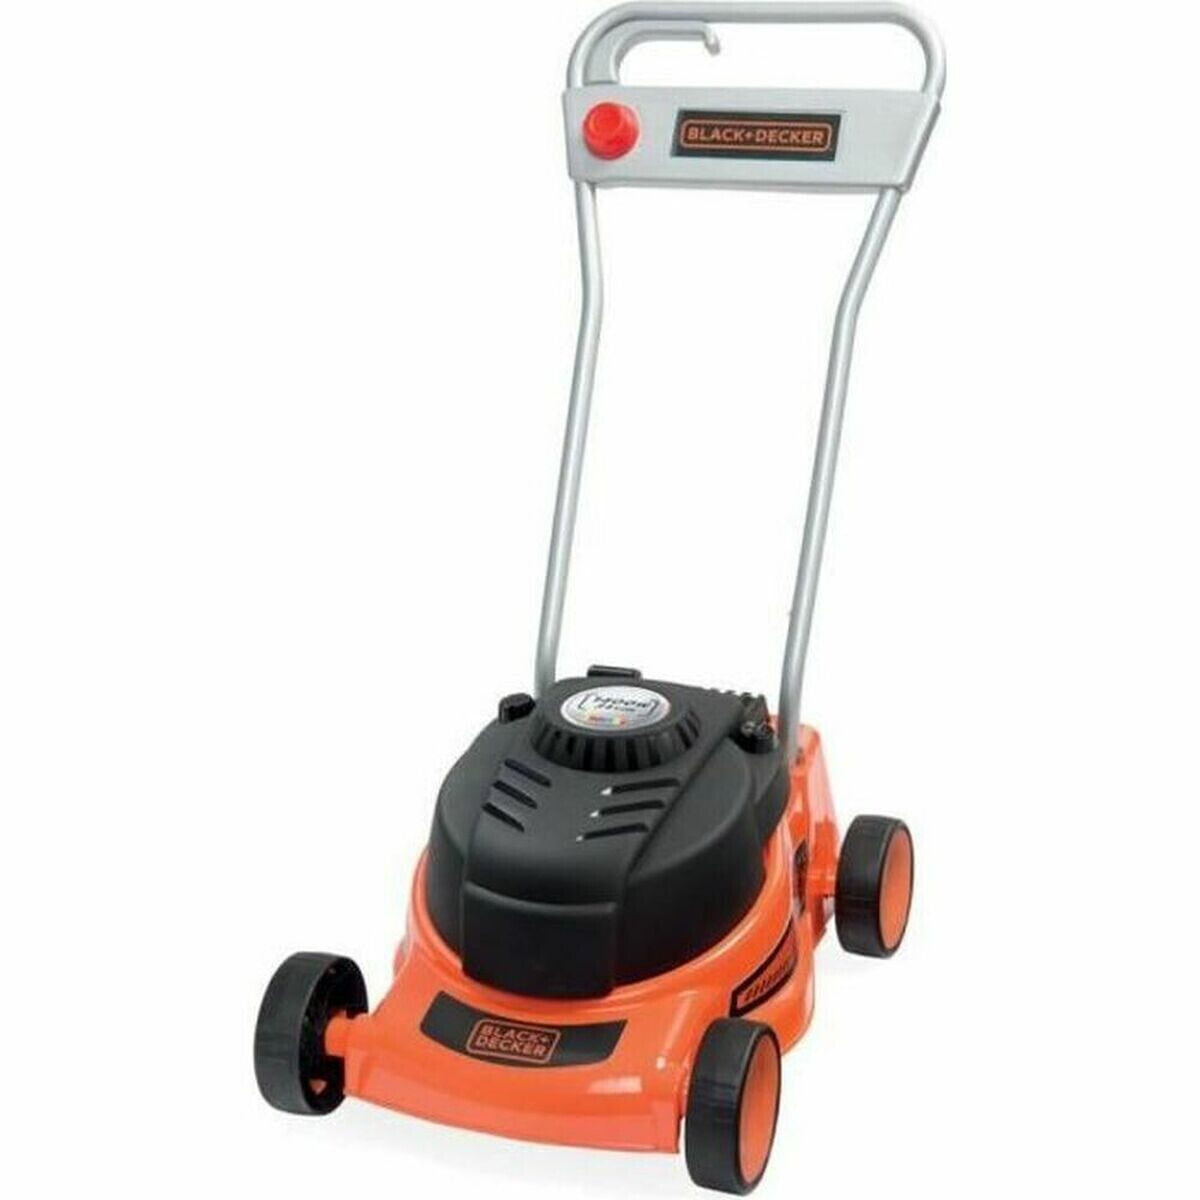 Toy lawnmower Smoby 7600360159